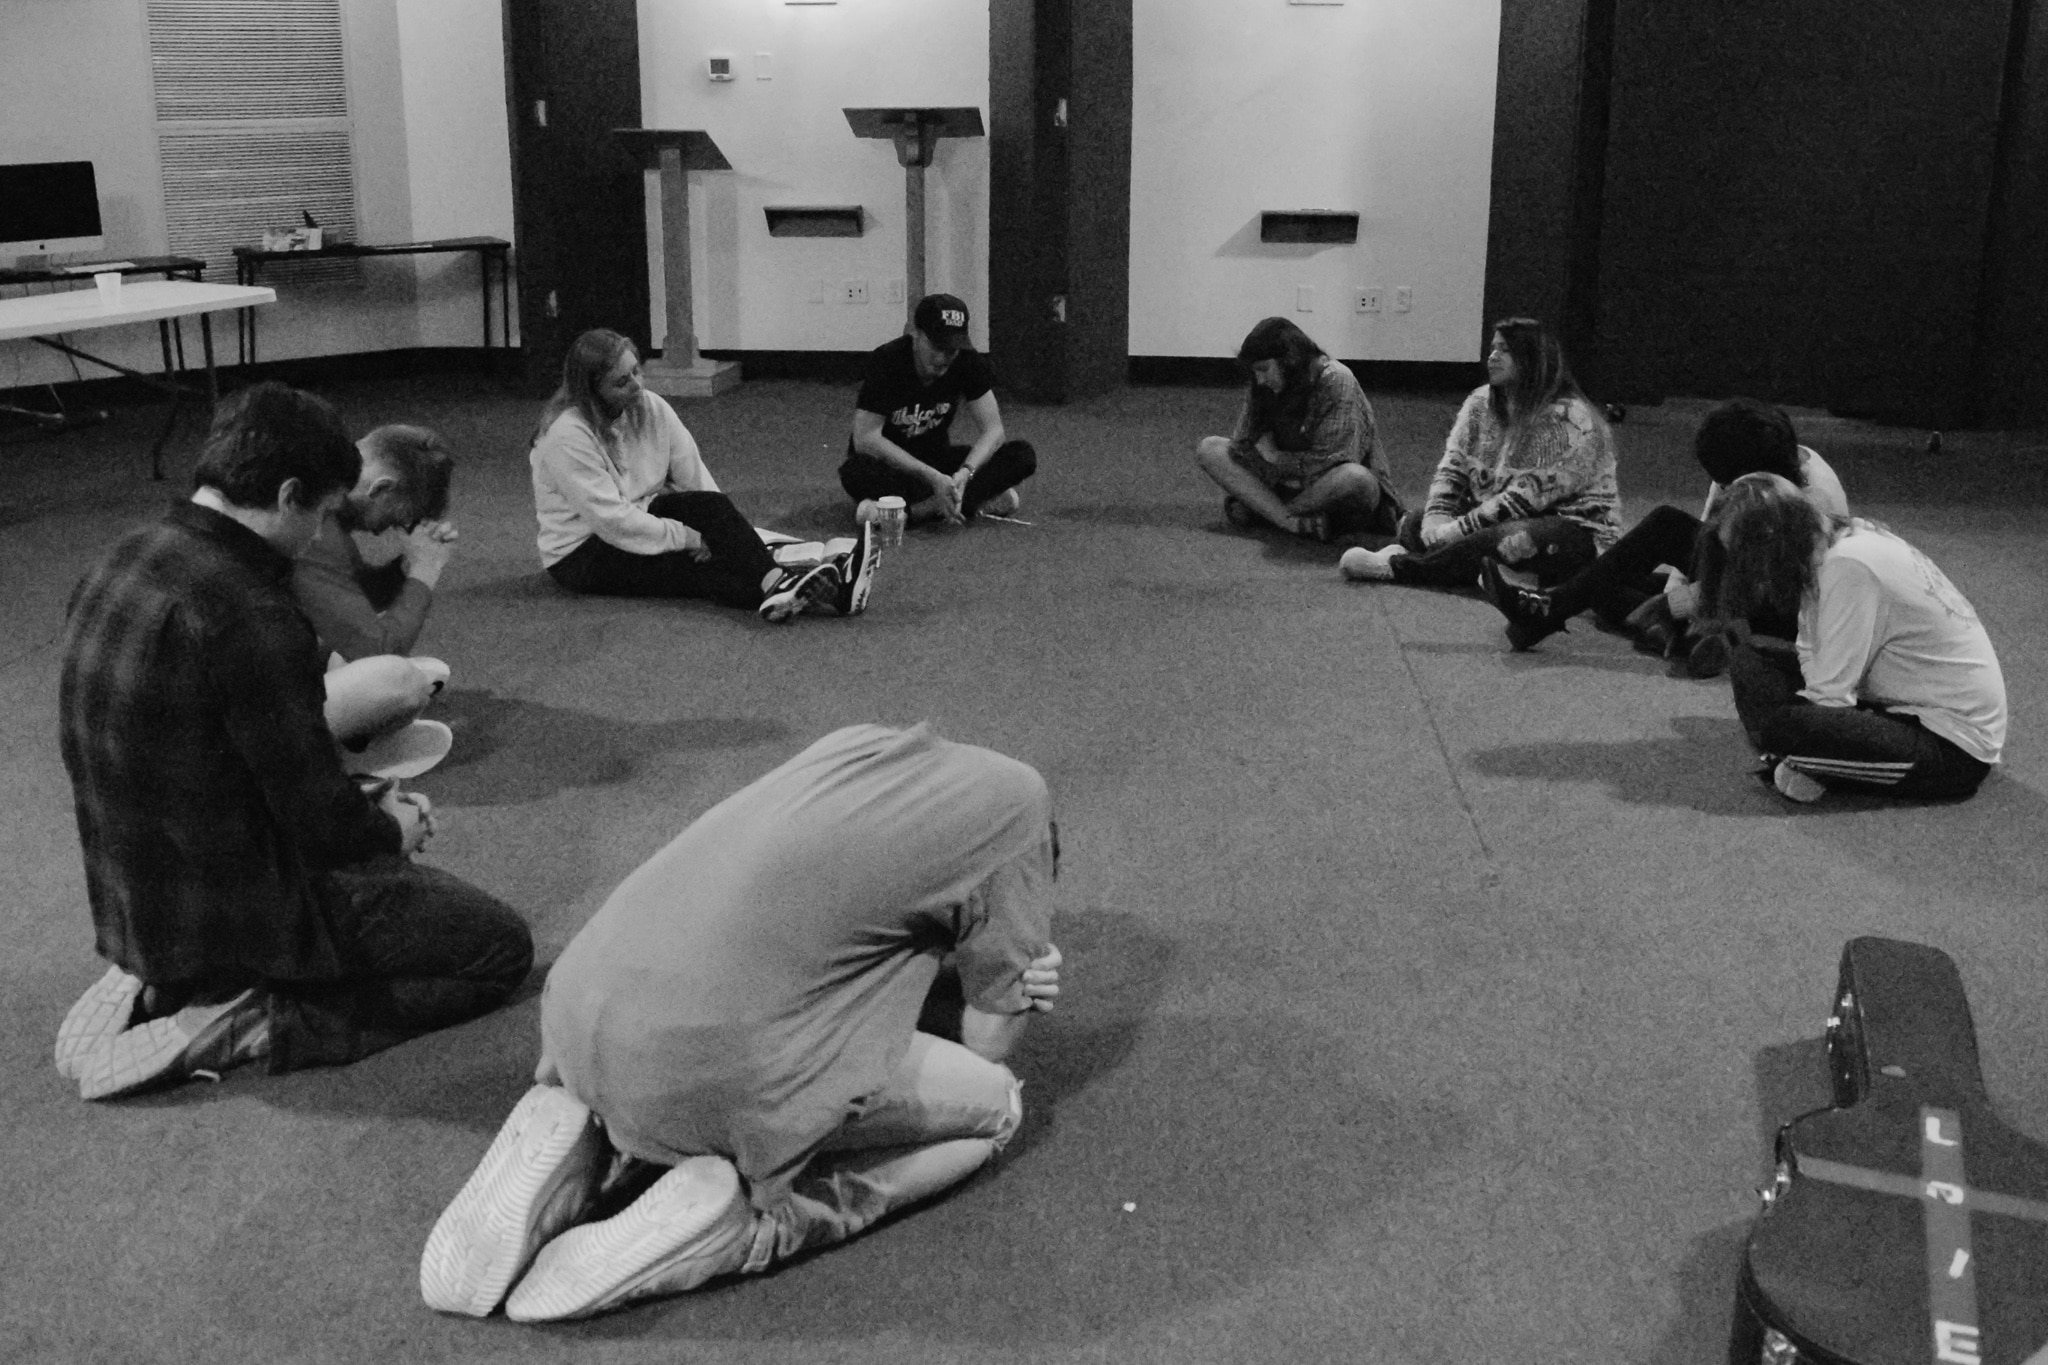 The entire group goes back and forth praying over certain subjects for an hour.